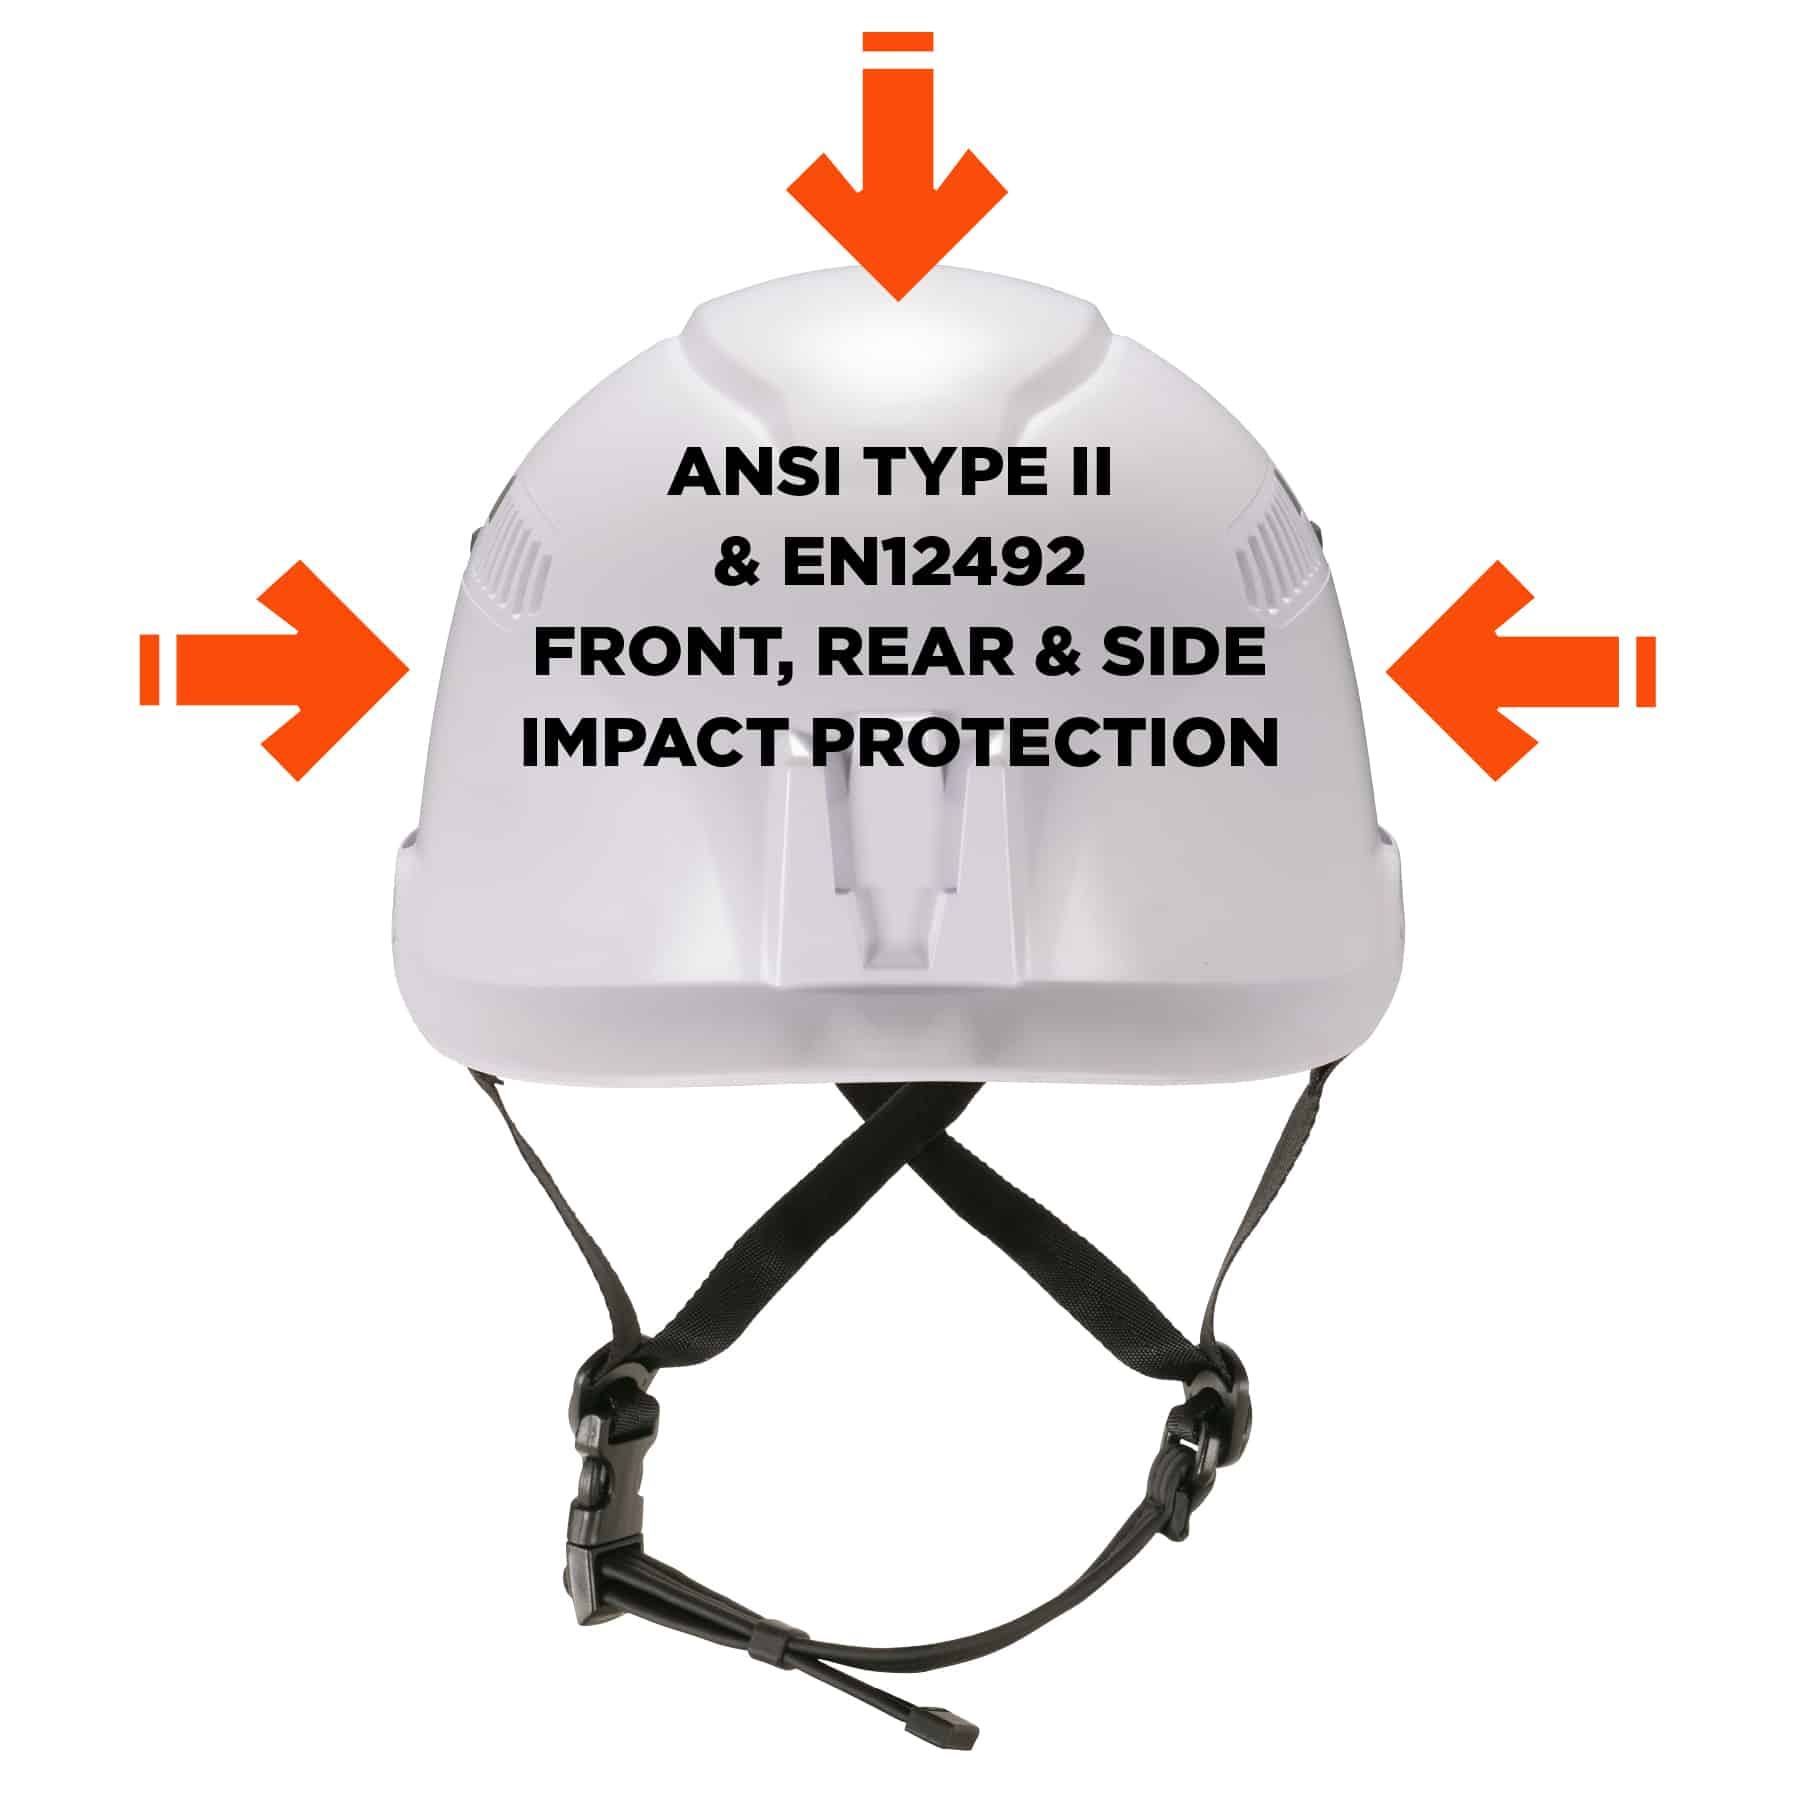 ANSI Type II and EN12492 front, rear and side impact protection